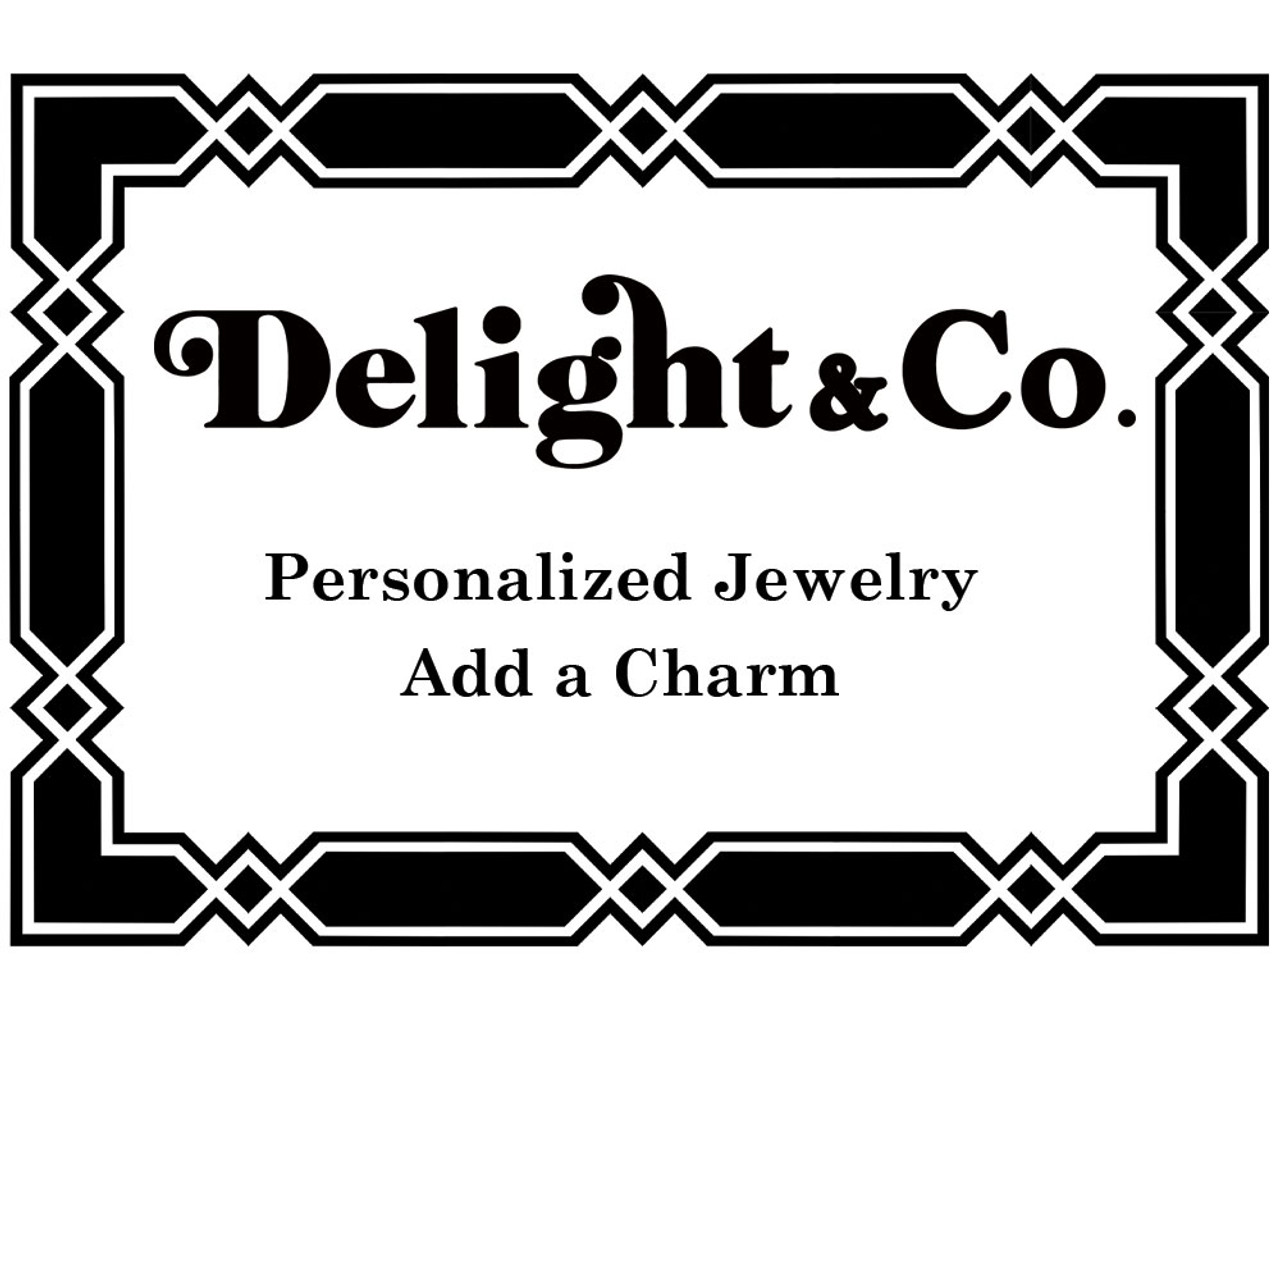 Add a Charm - Delight Jewelry